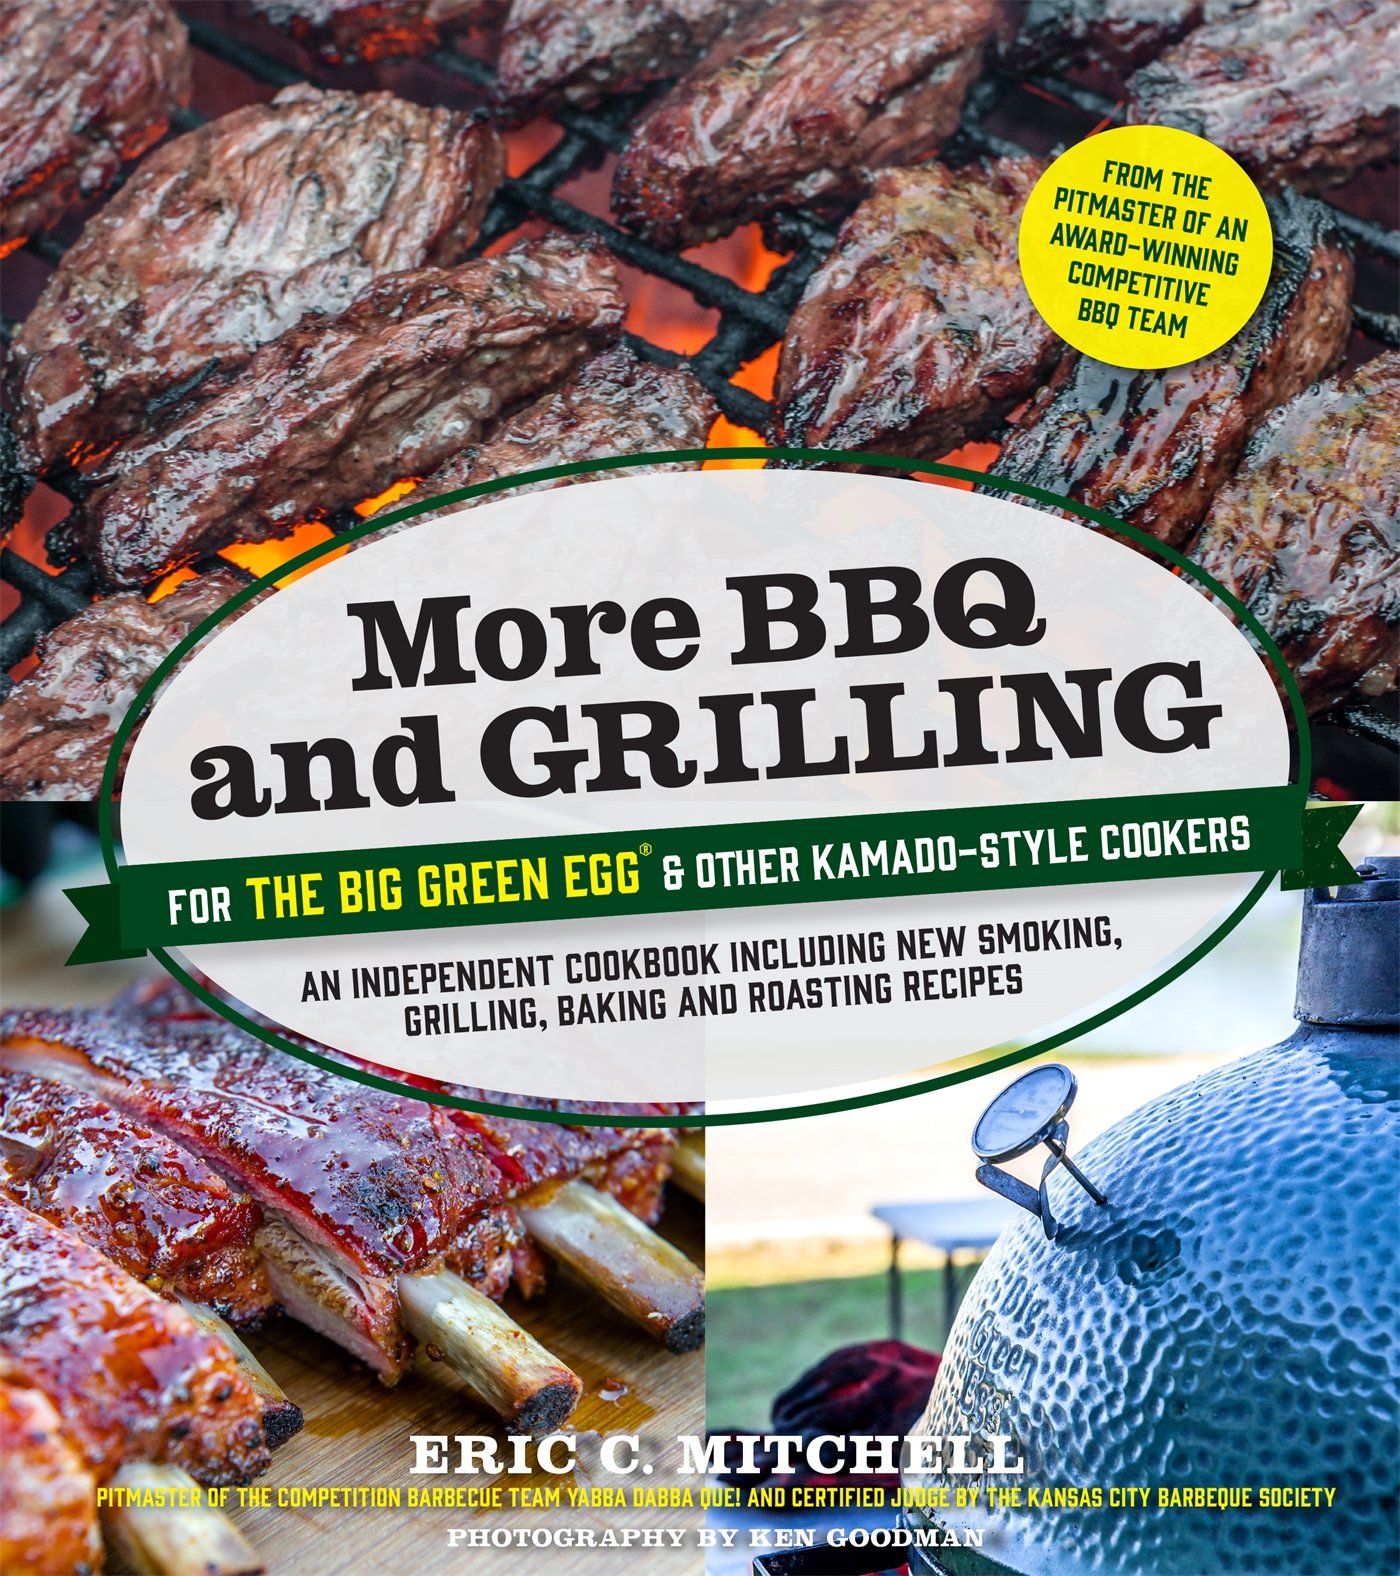 Cool Smoke: The Art of Great Barbecue by Tuffy Stone